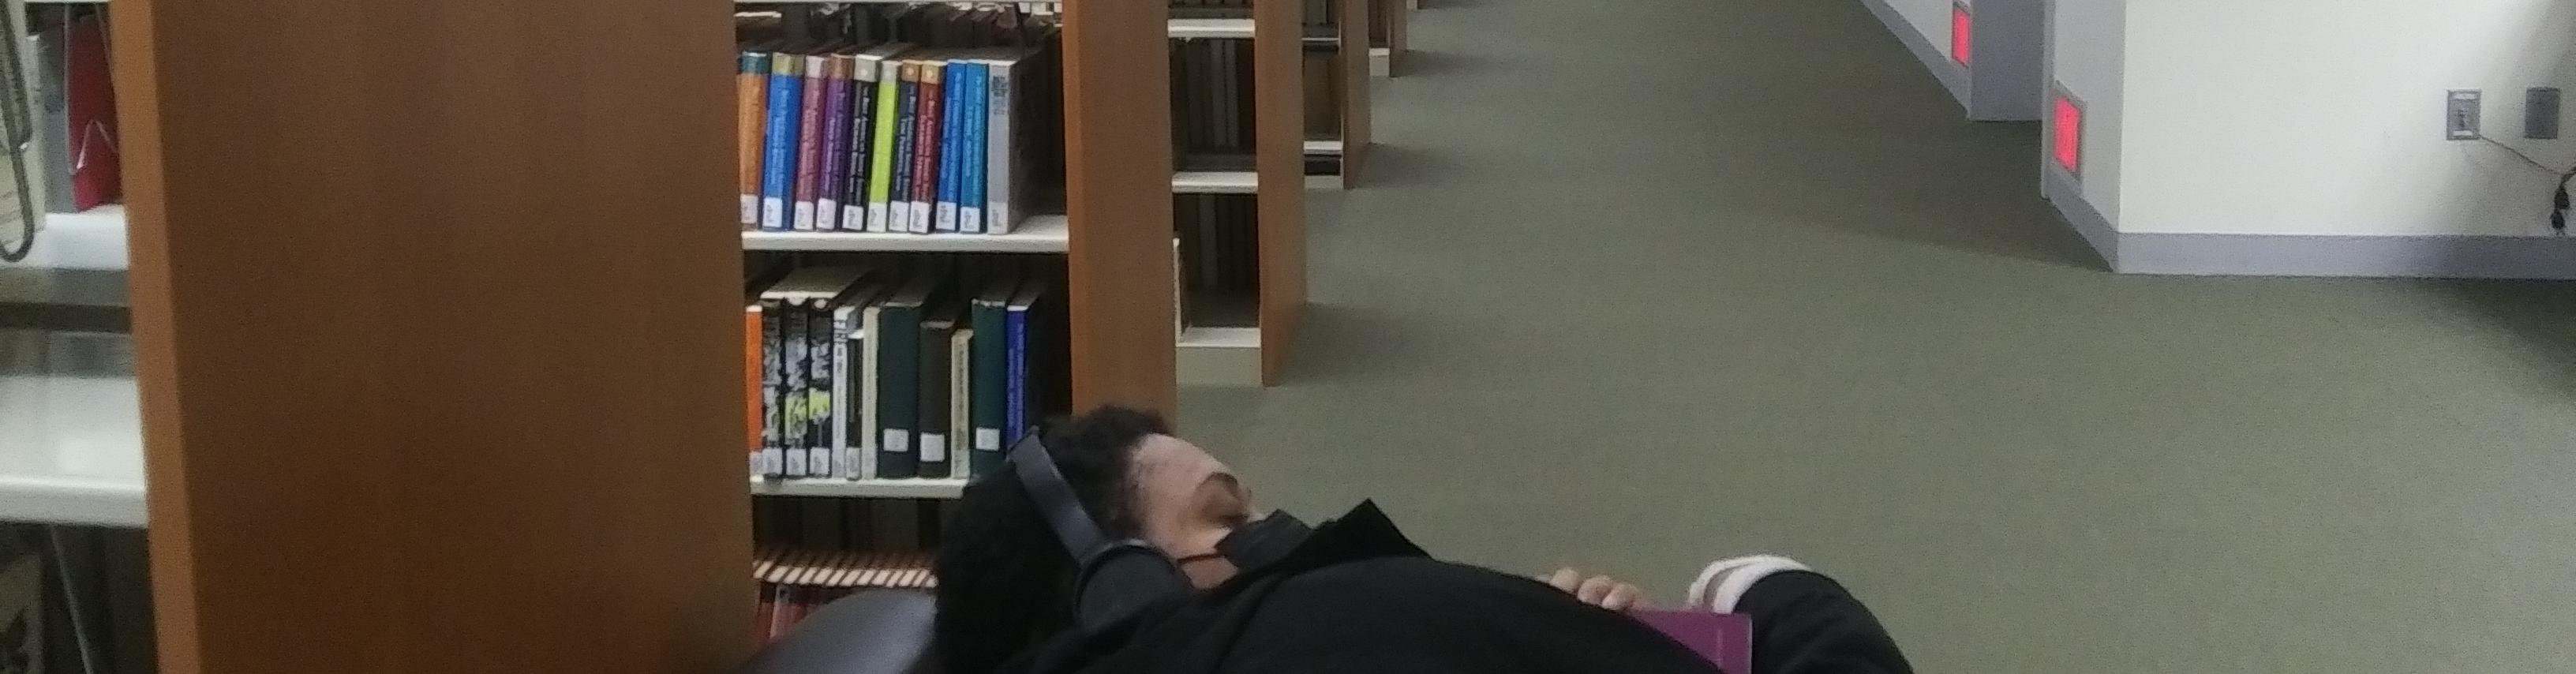 Student relaxing in library holding a book with eyes closed and headphone on